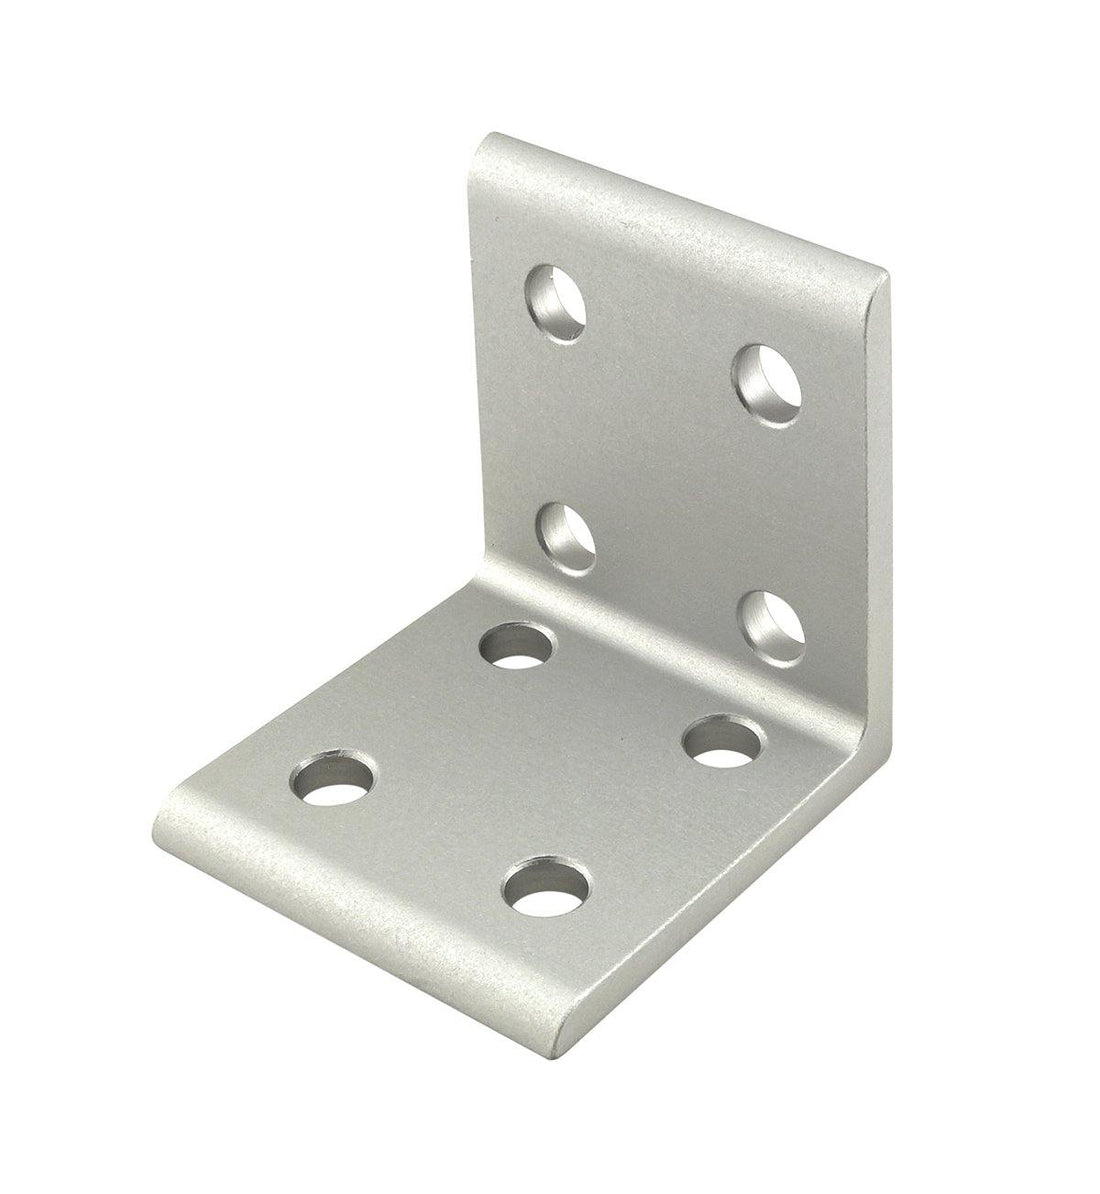 9090 Inside Corner Brackets 8 hole 45 series - Pack of 1 - Extrusion and CNC